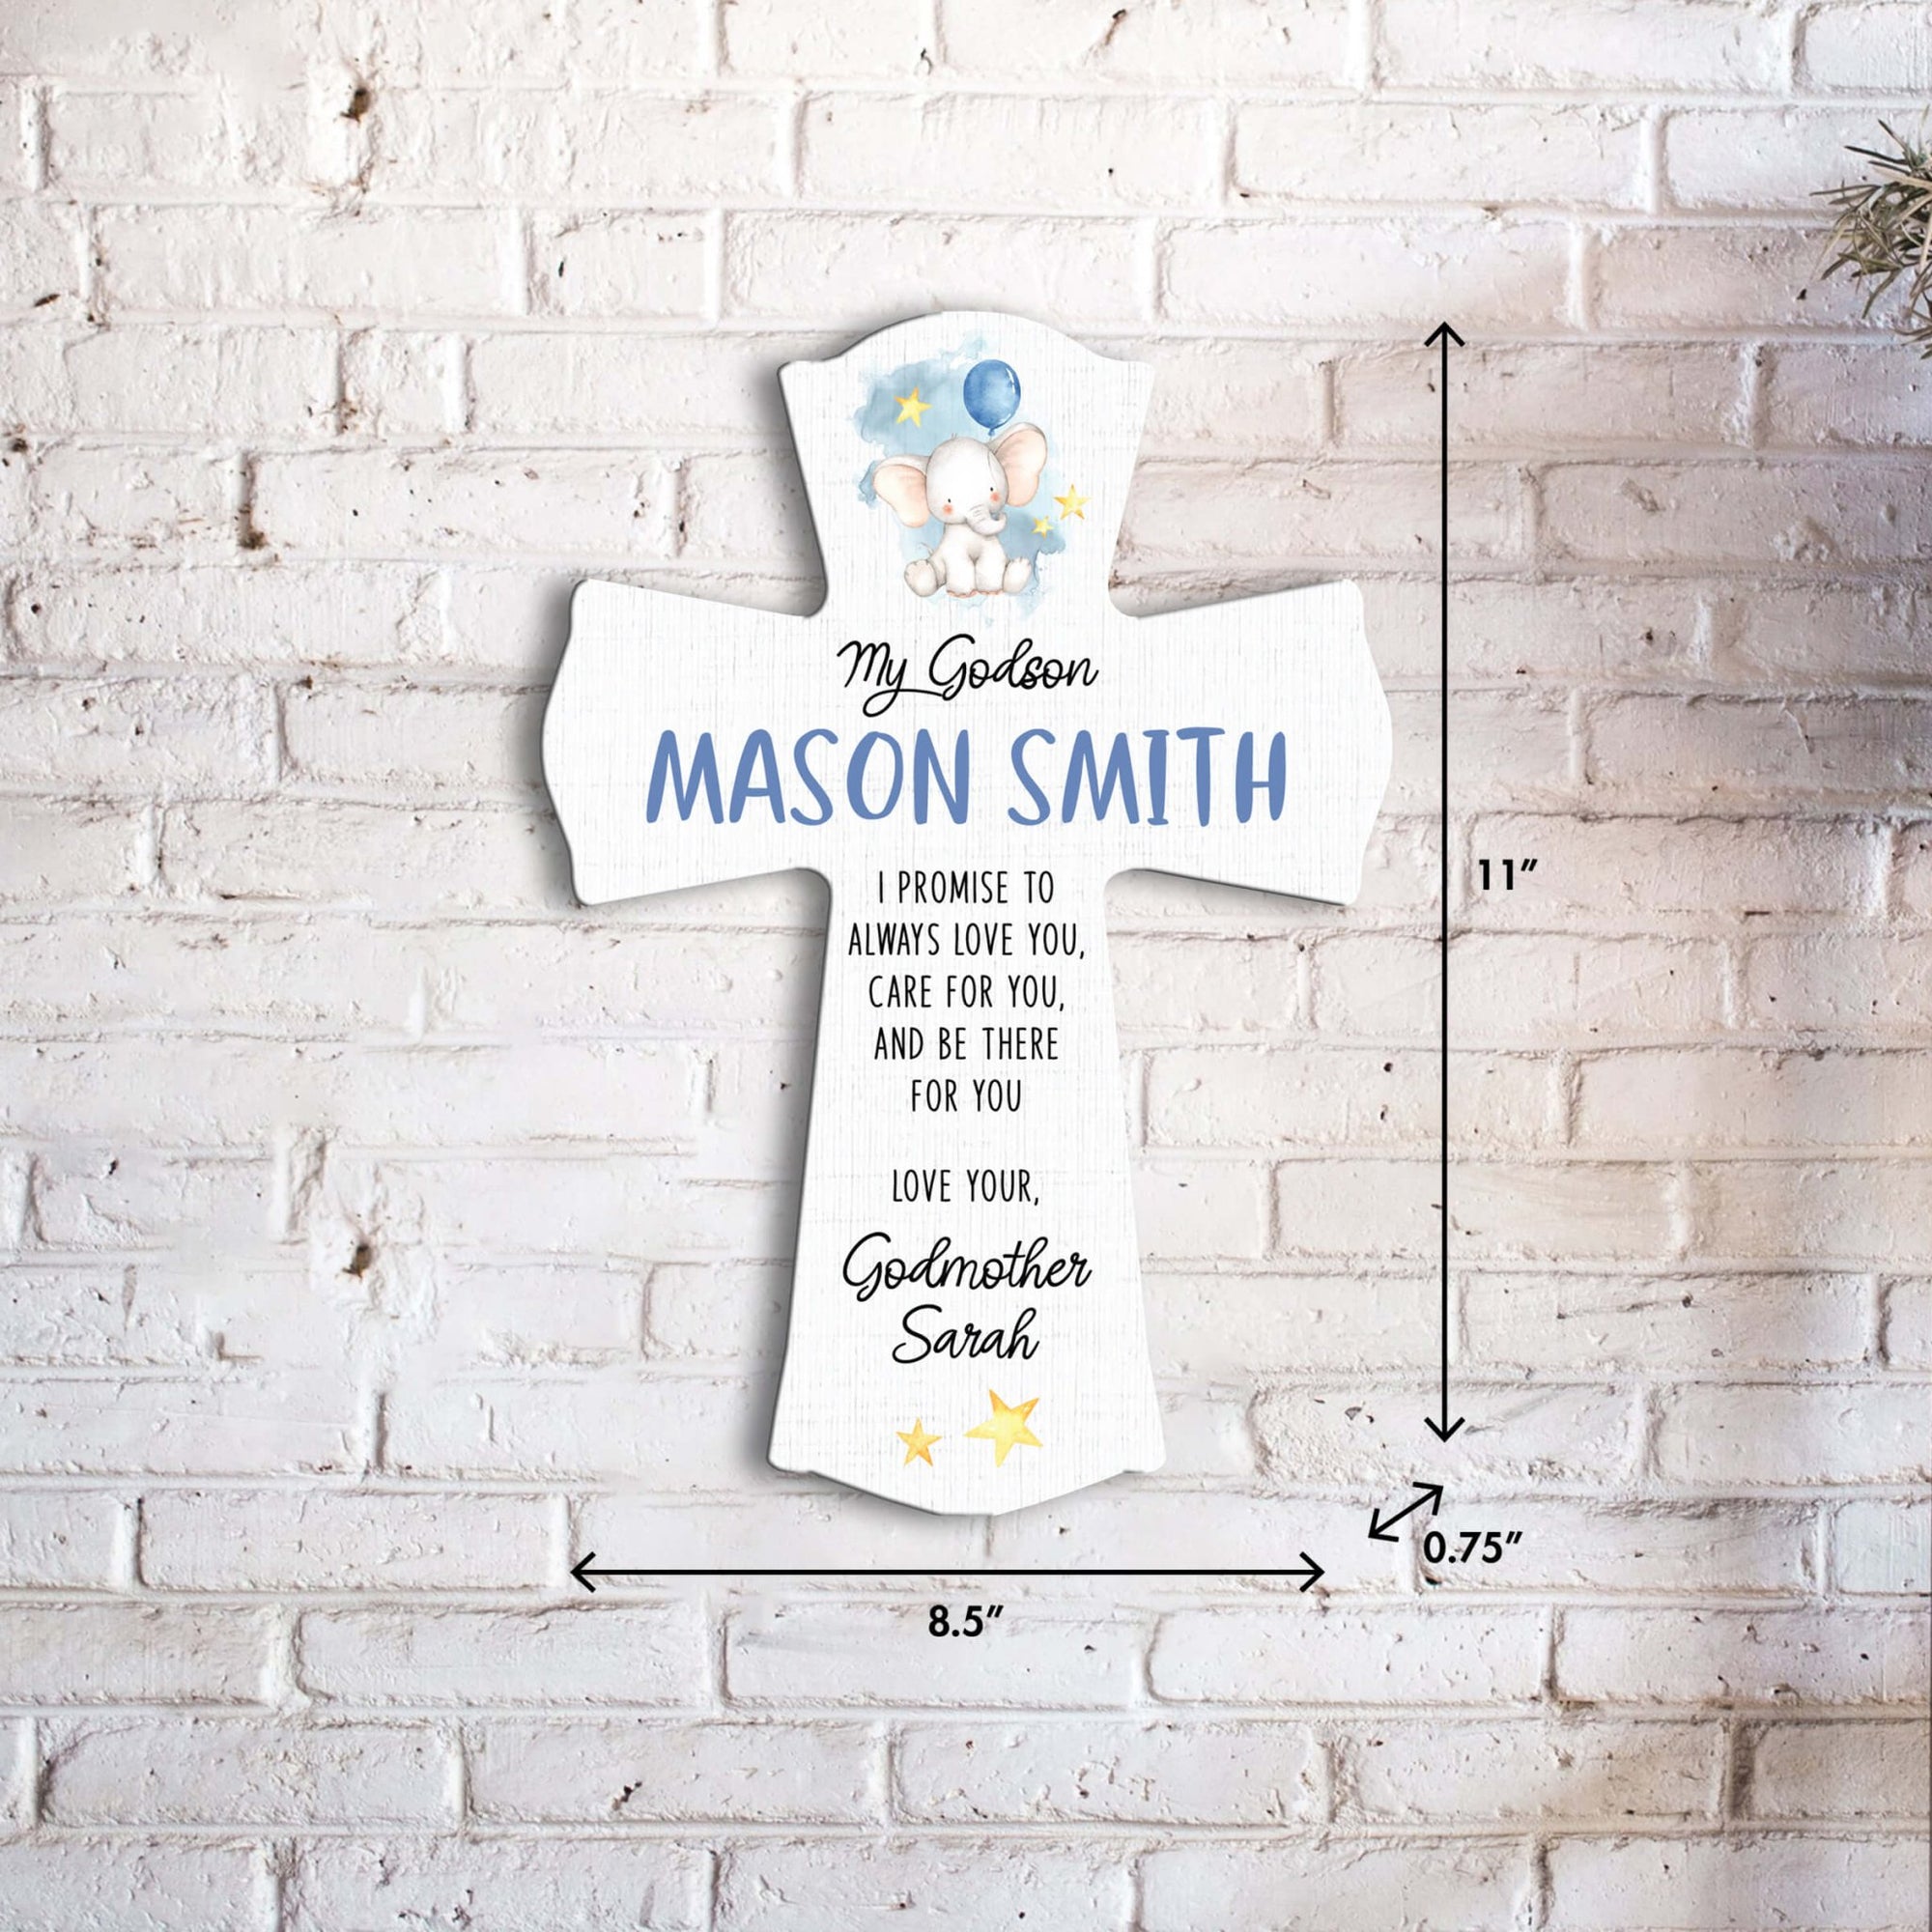 Personalized Wooden Wall Cross for Godson - LifeSong Milestones